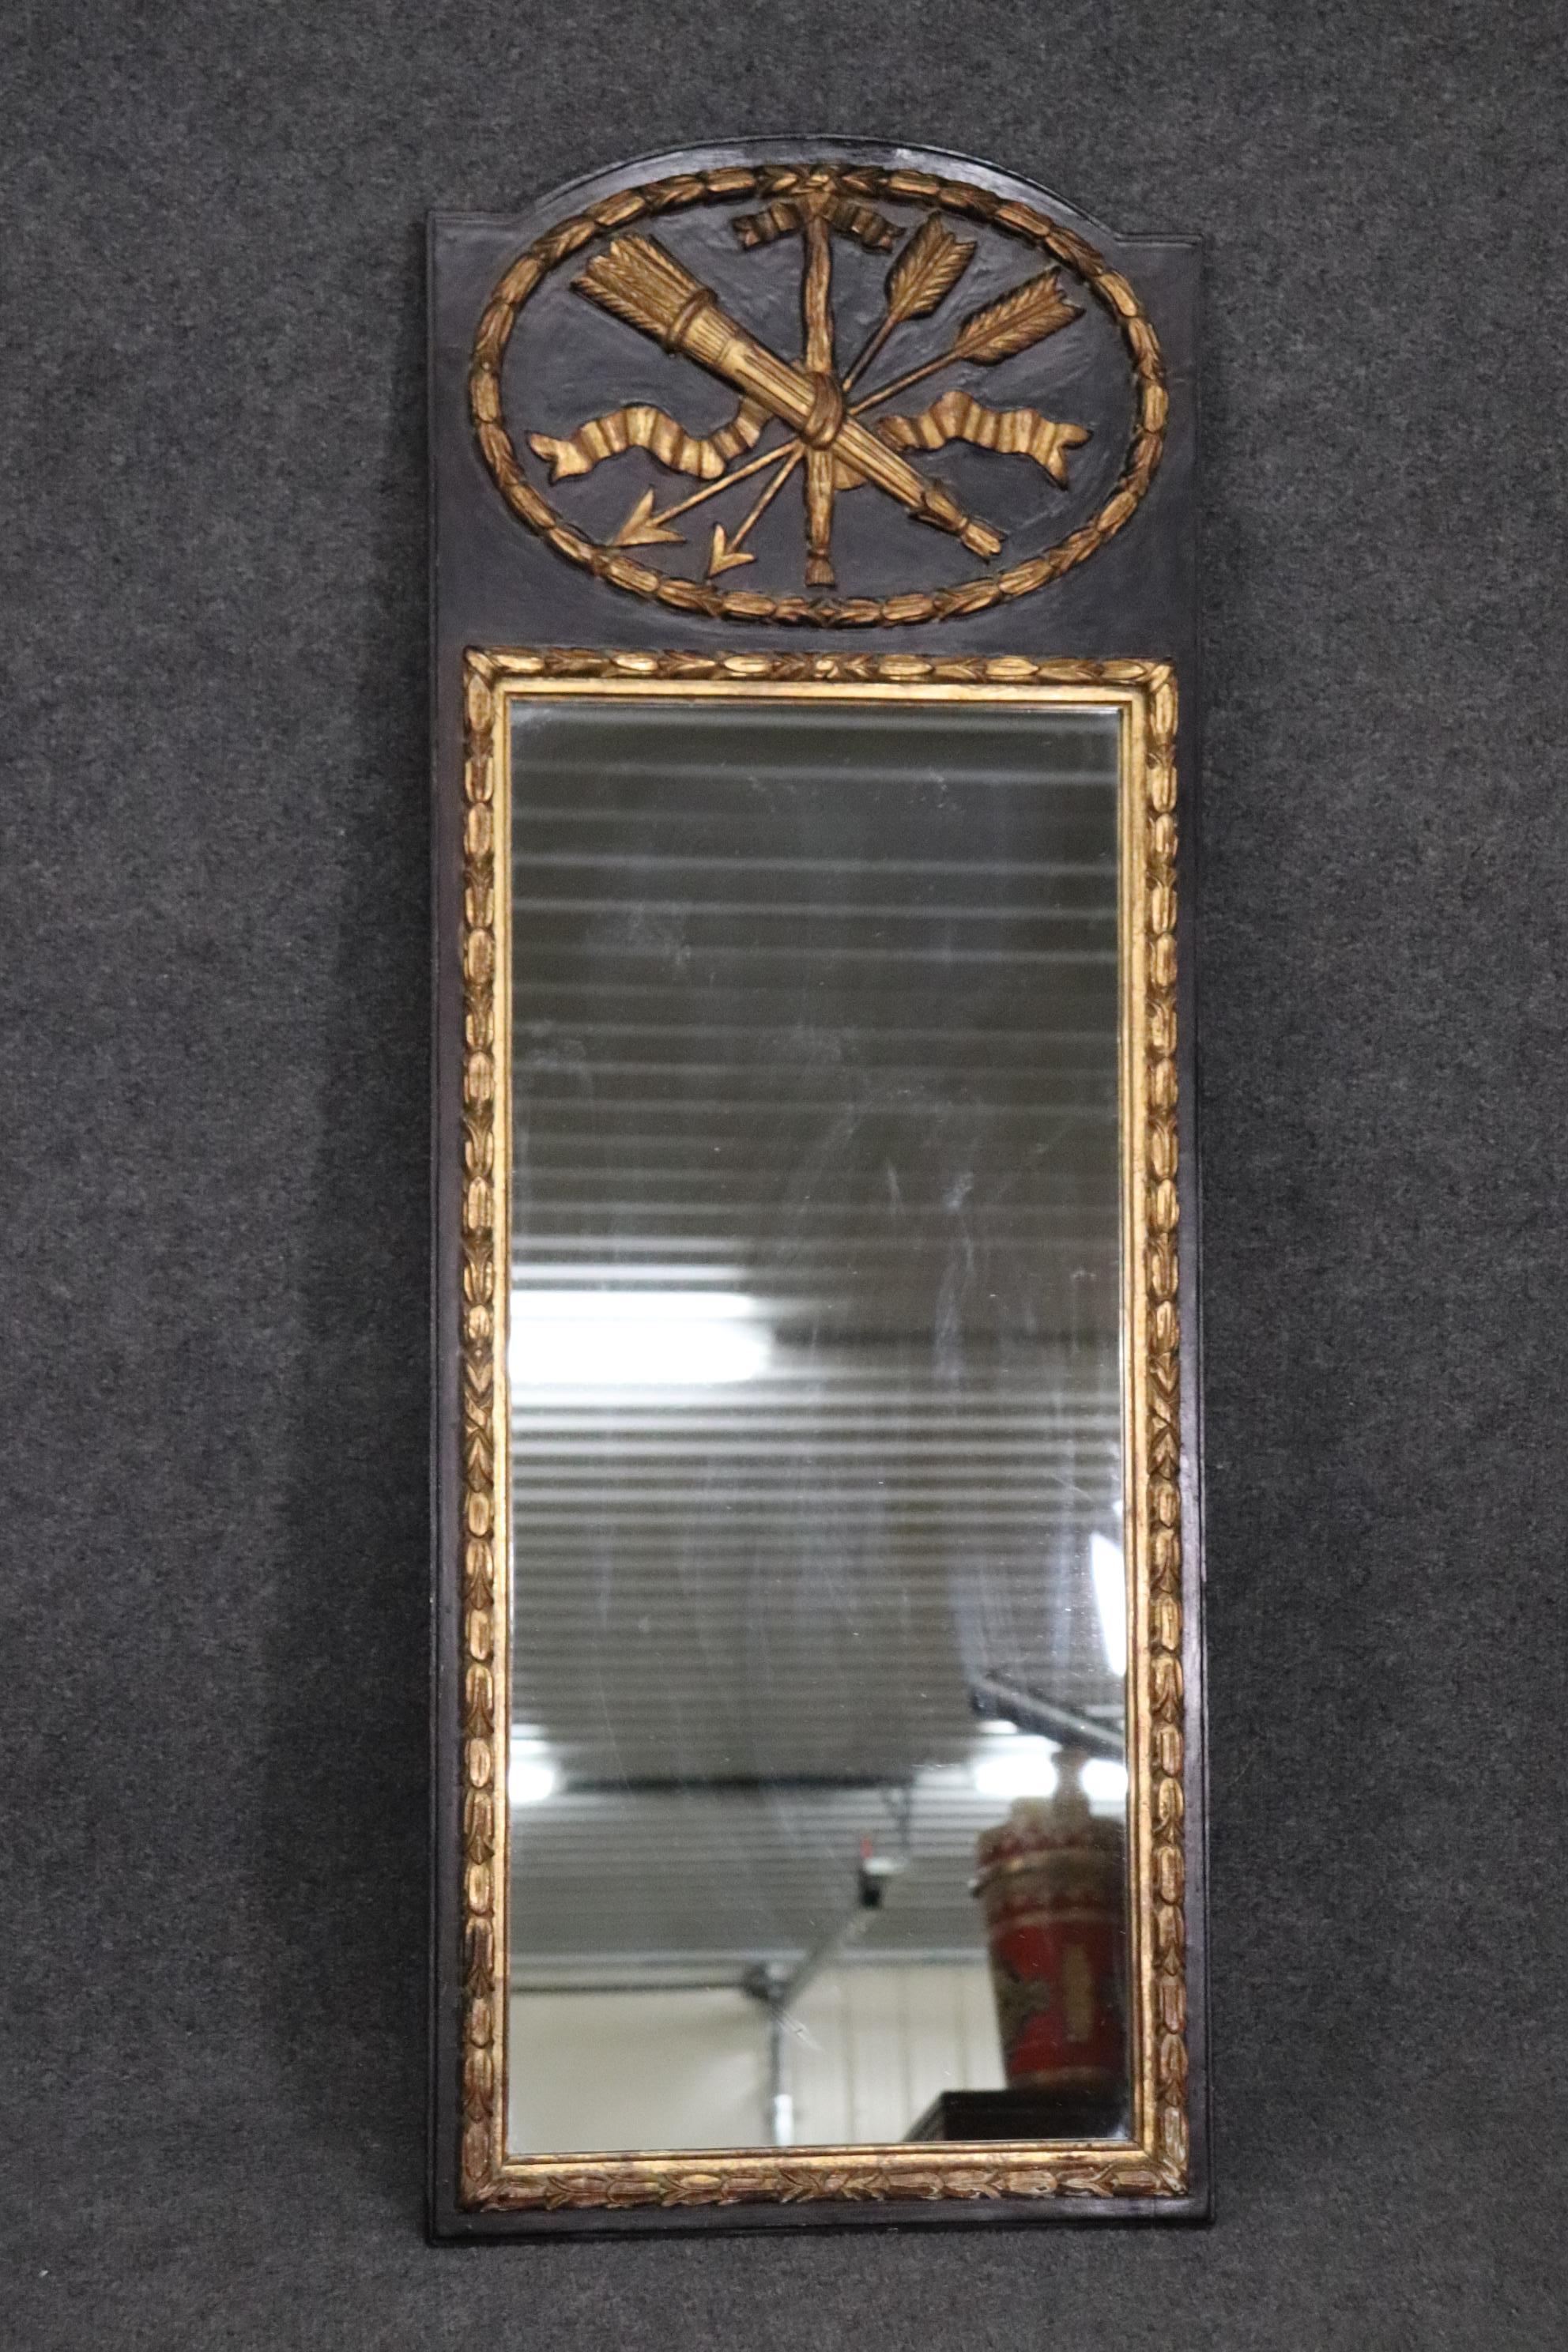 This is a beautiful Italian-made French Louis XV mirror. The frame is done in an black finish and gilded as well. The mirror measures 51 tall x 19 wide x 1.5 diameter. This mirror is in very good condition.